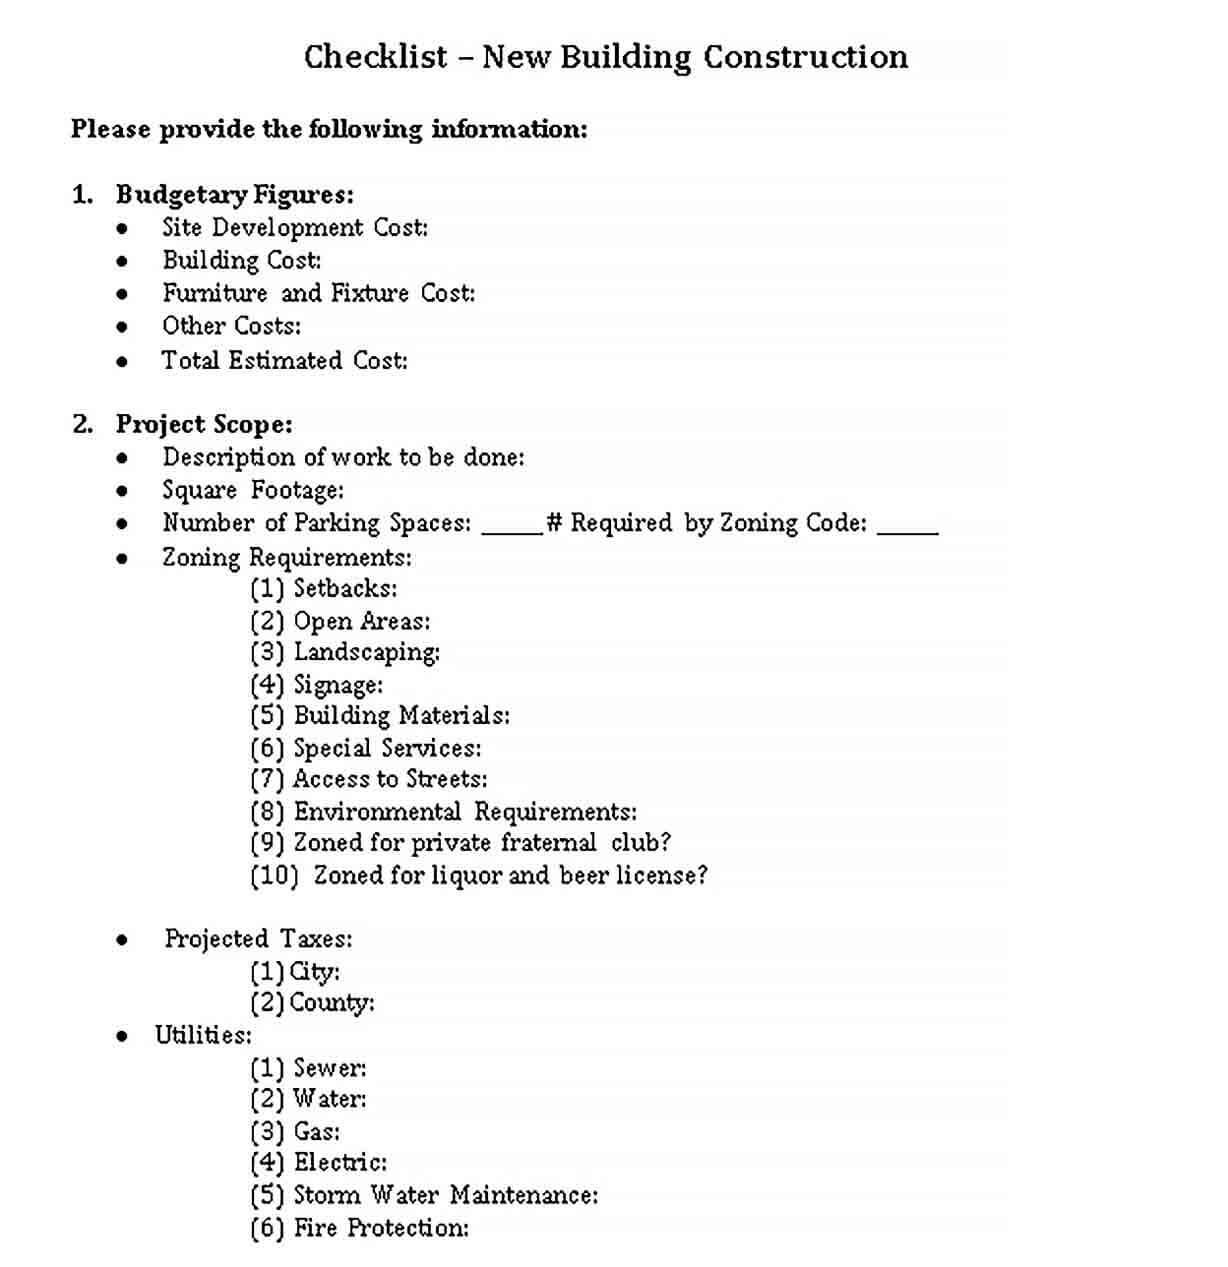 Sample Checklist for Building Construction